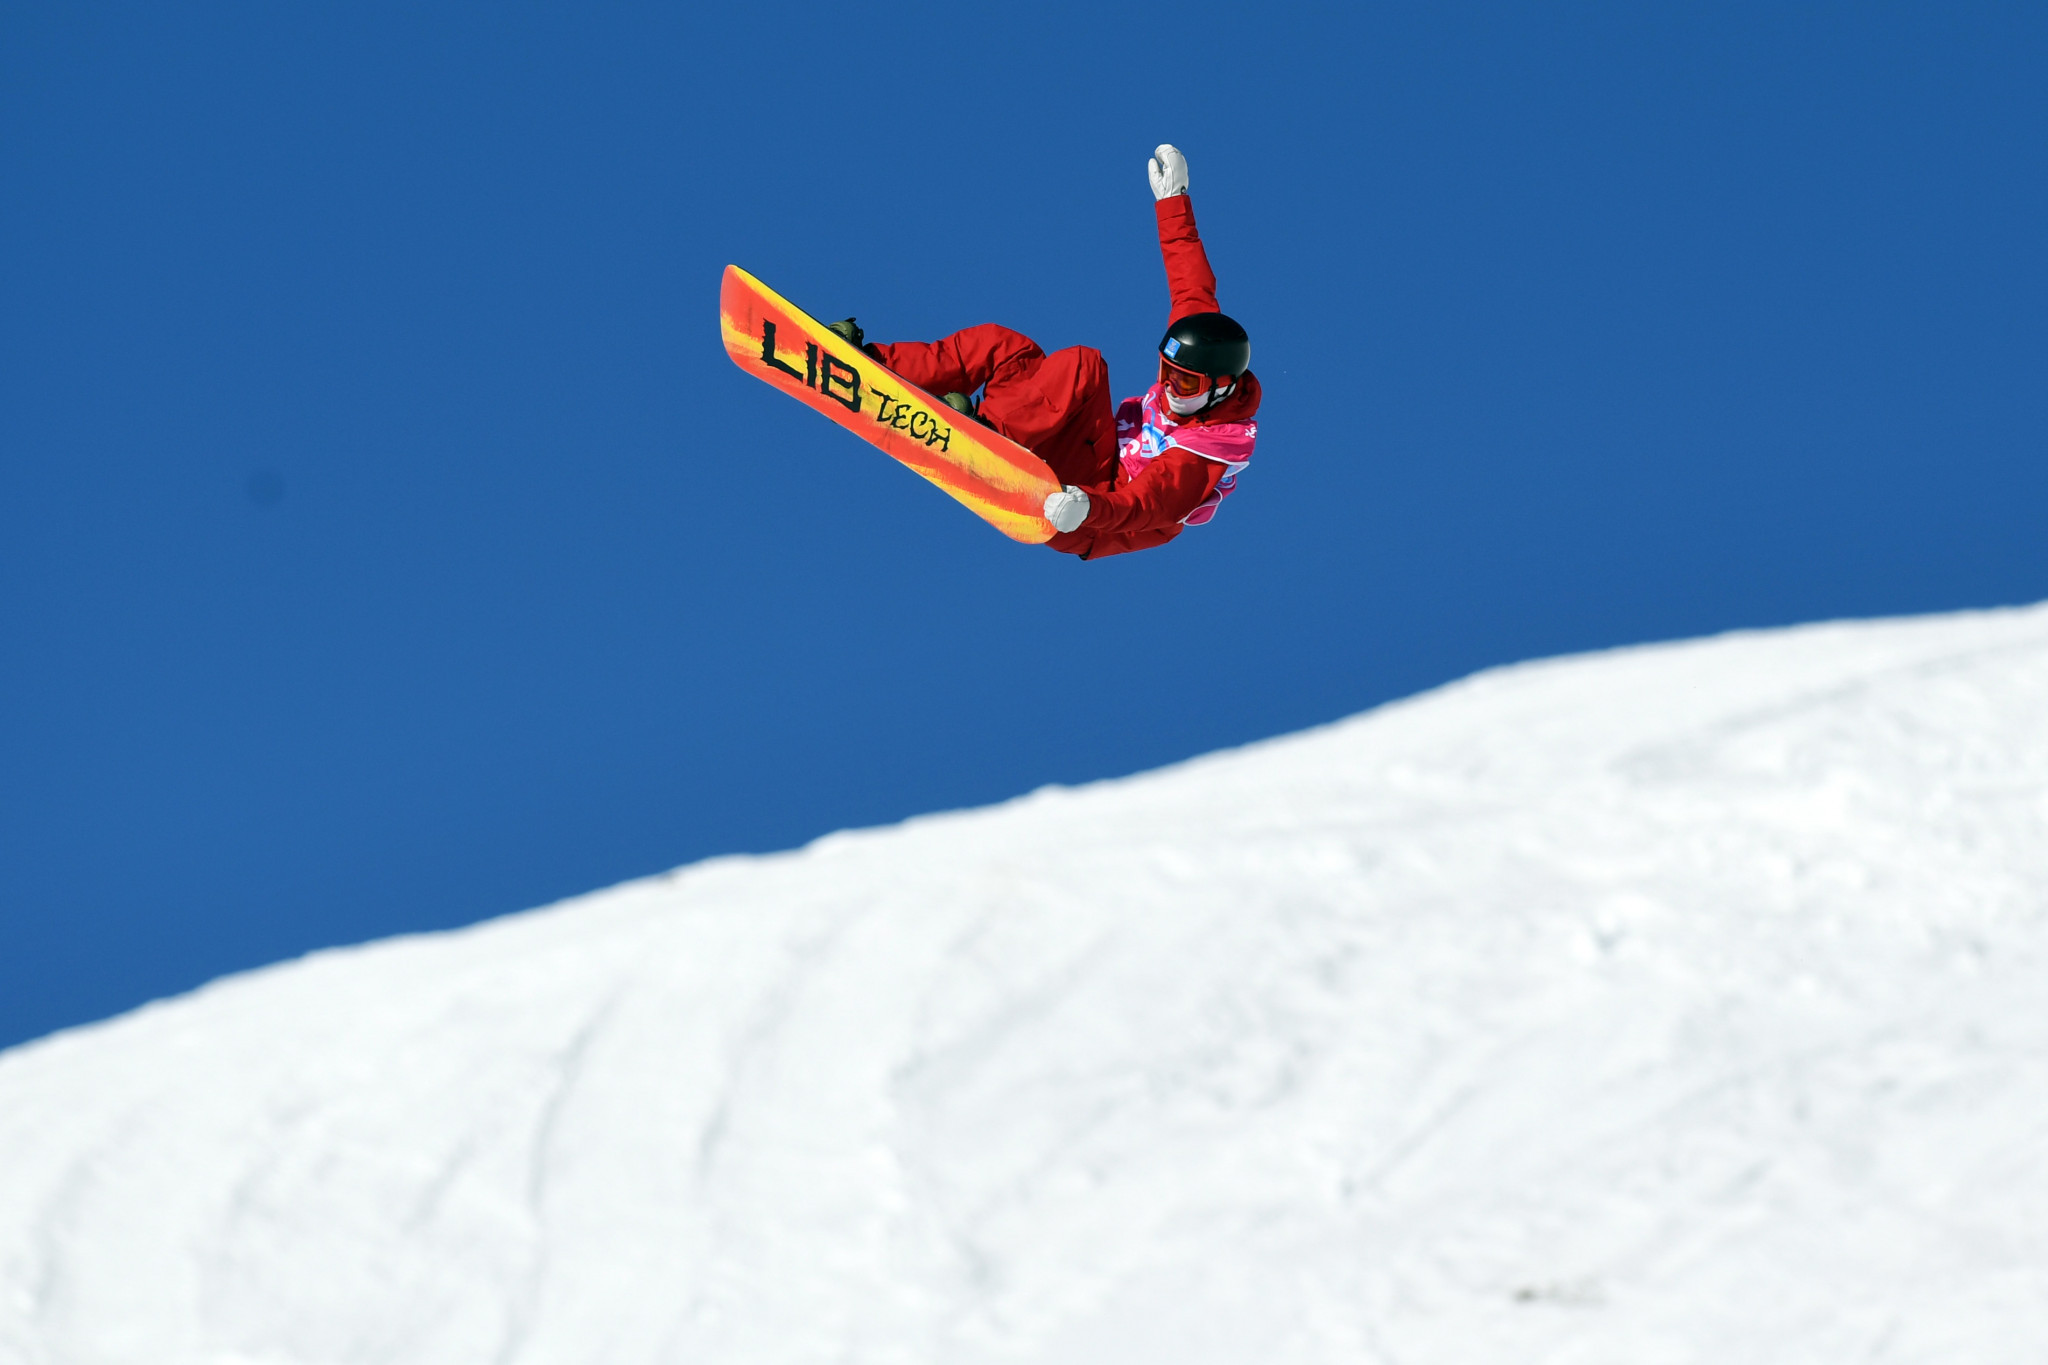 Corvatsch is now due to host the final Snowboard World Cup slopestyle event of the season ©Getty Images